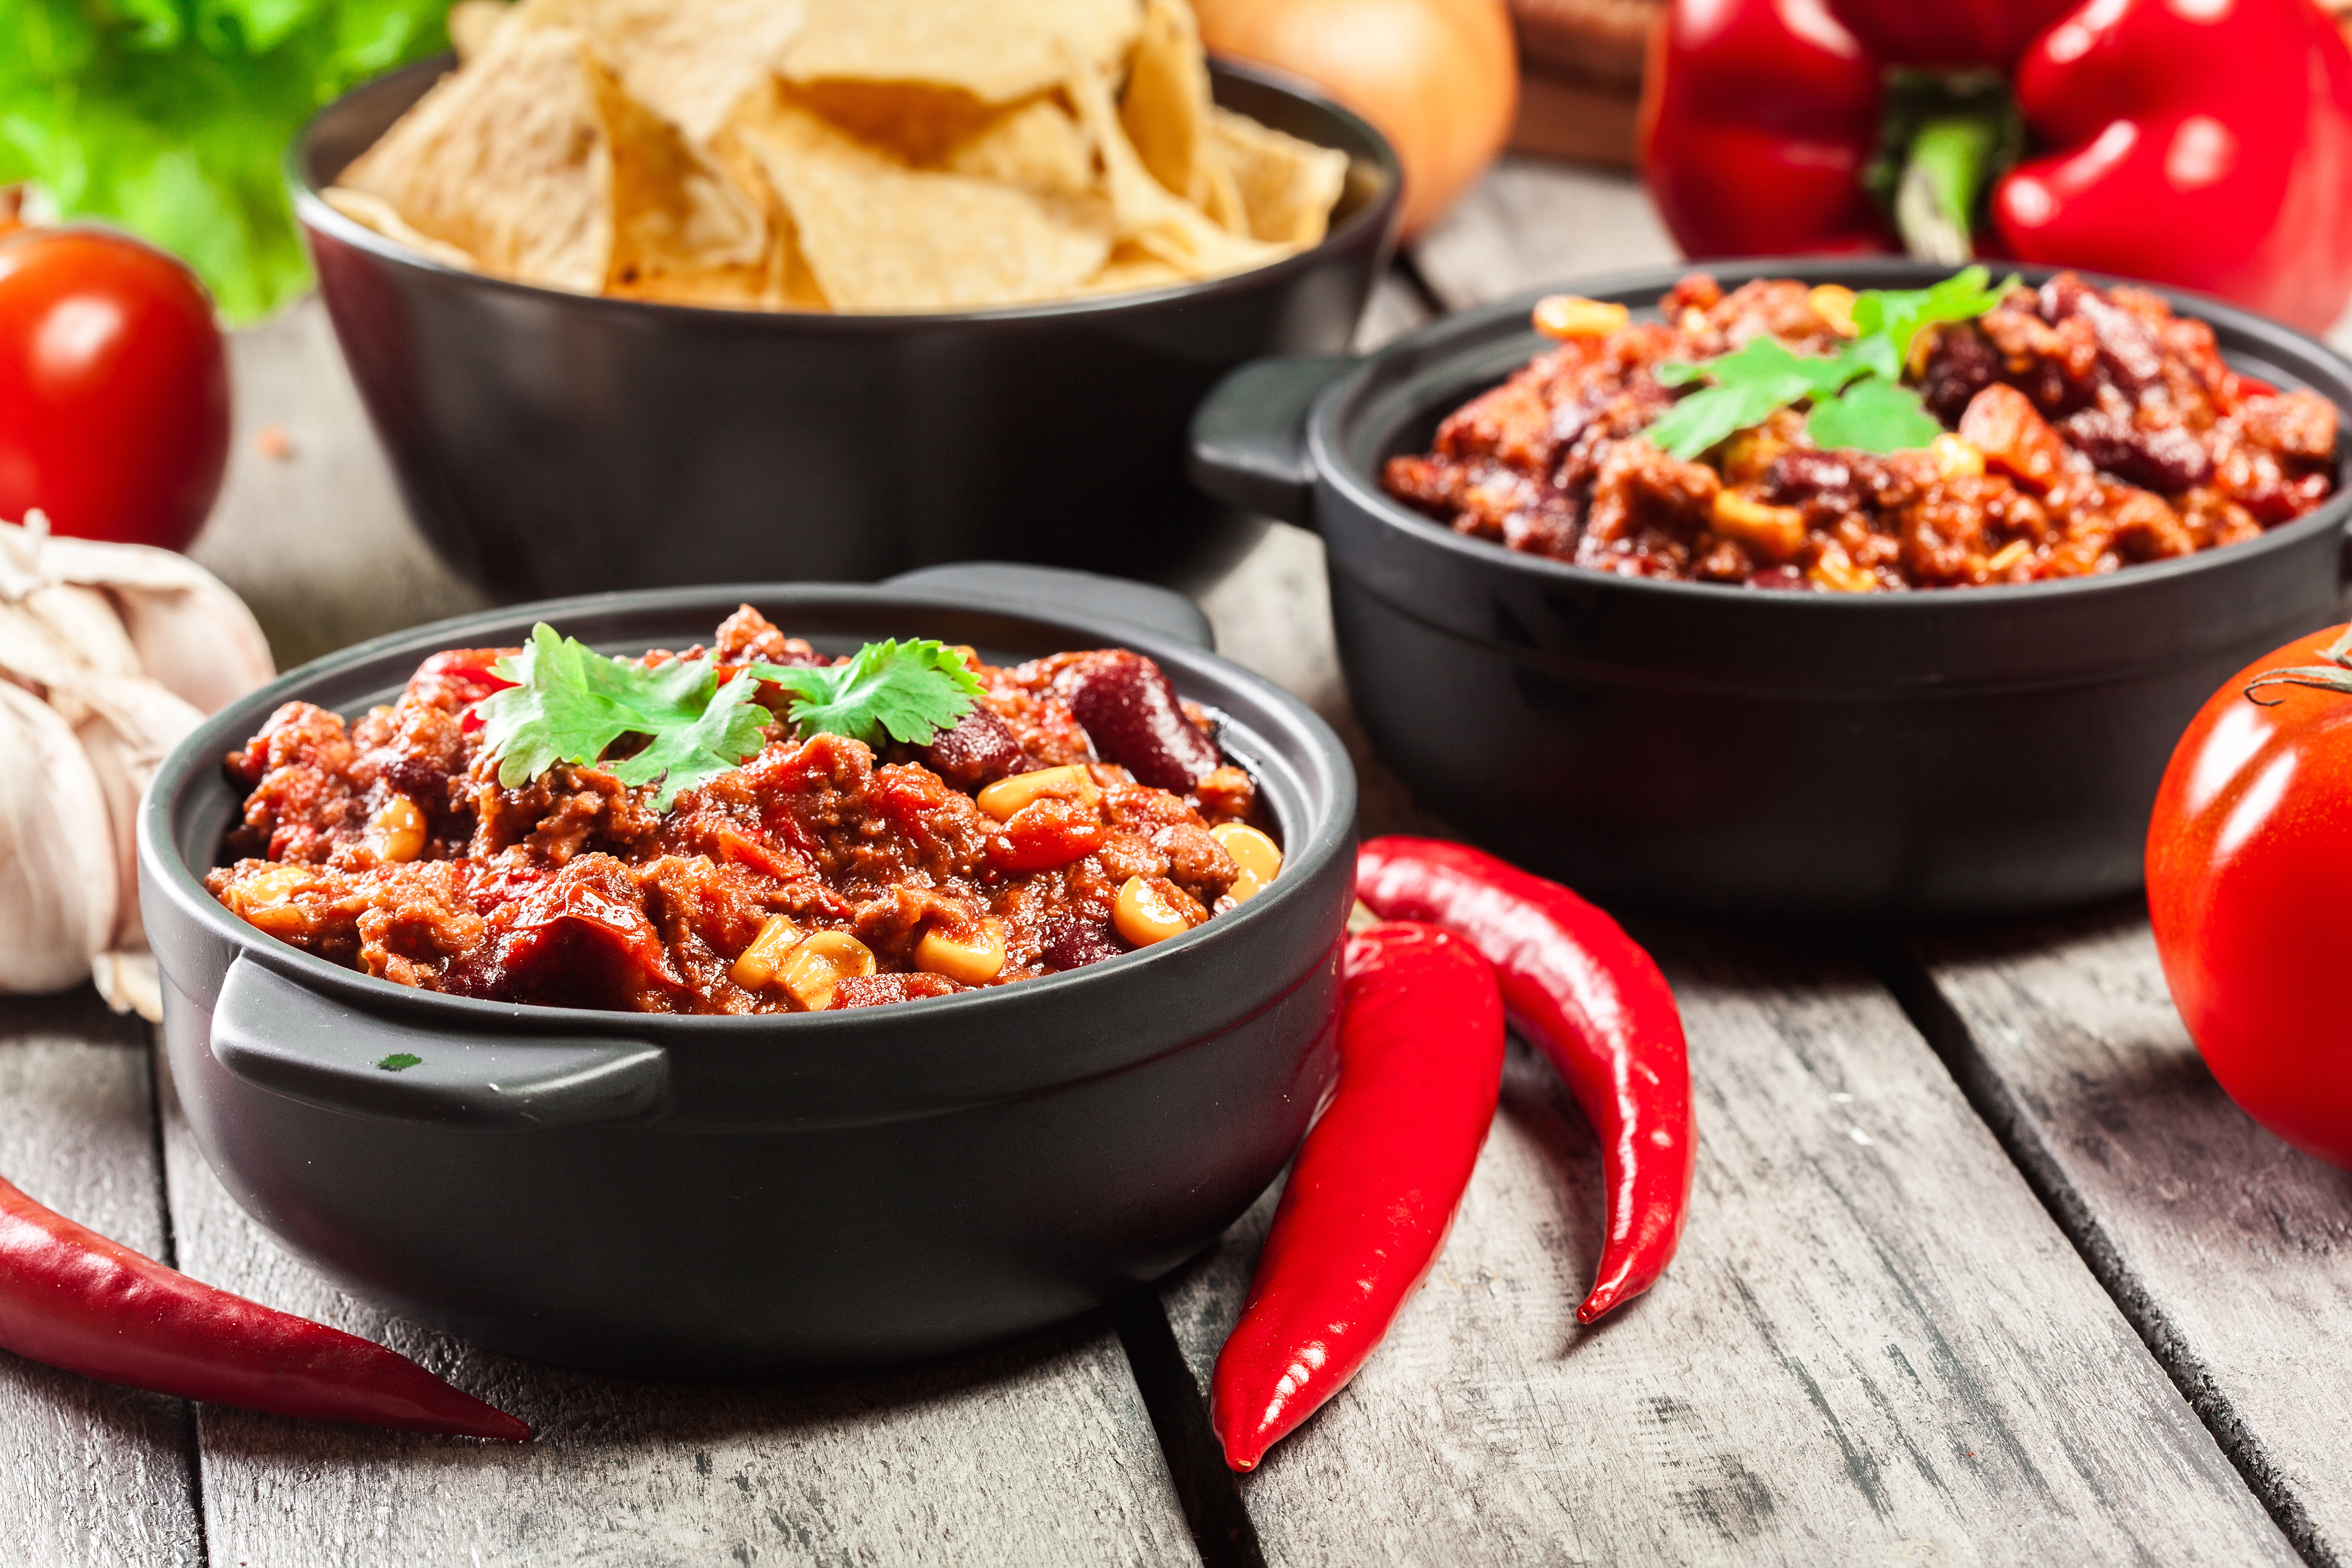 Chili Is the Jelly to Football’s Peanut Butter